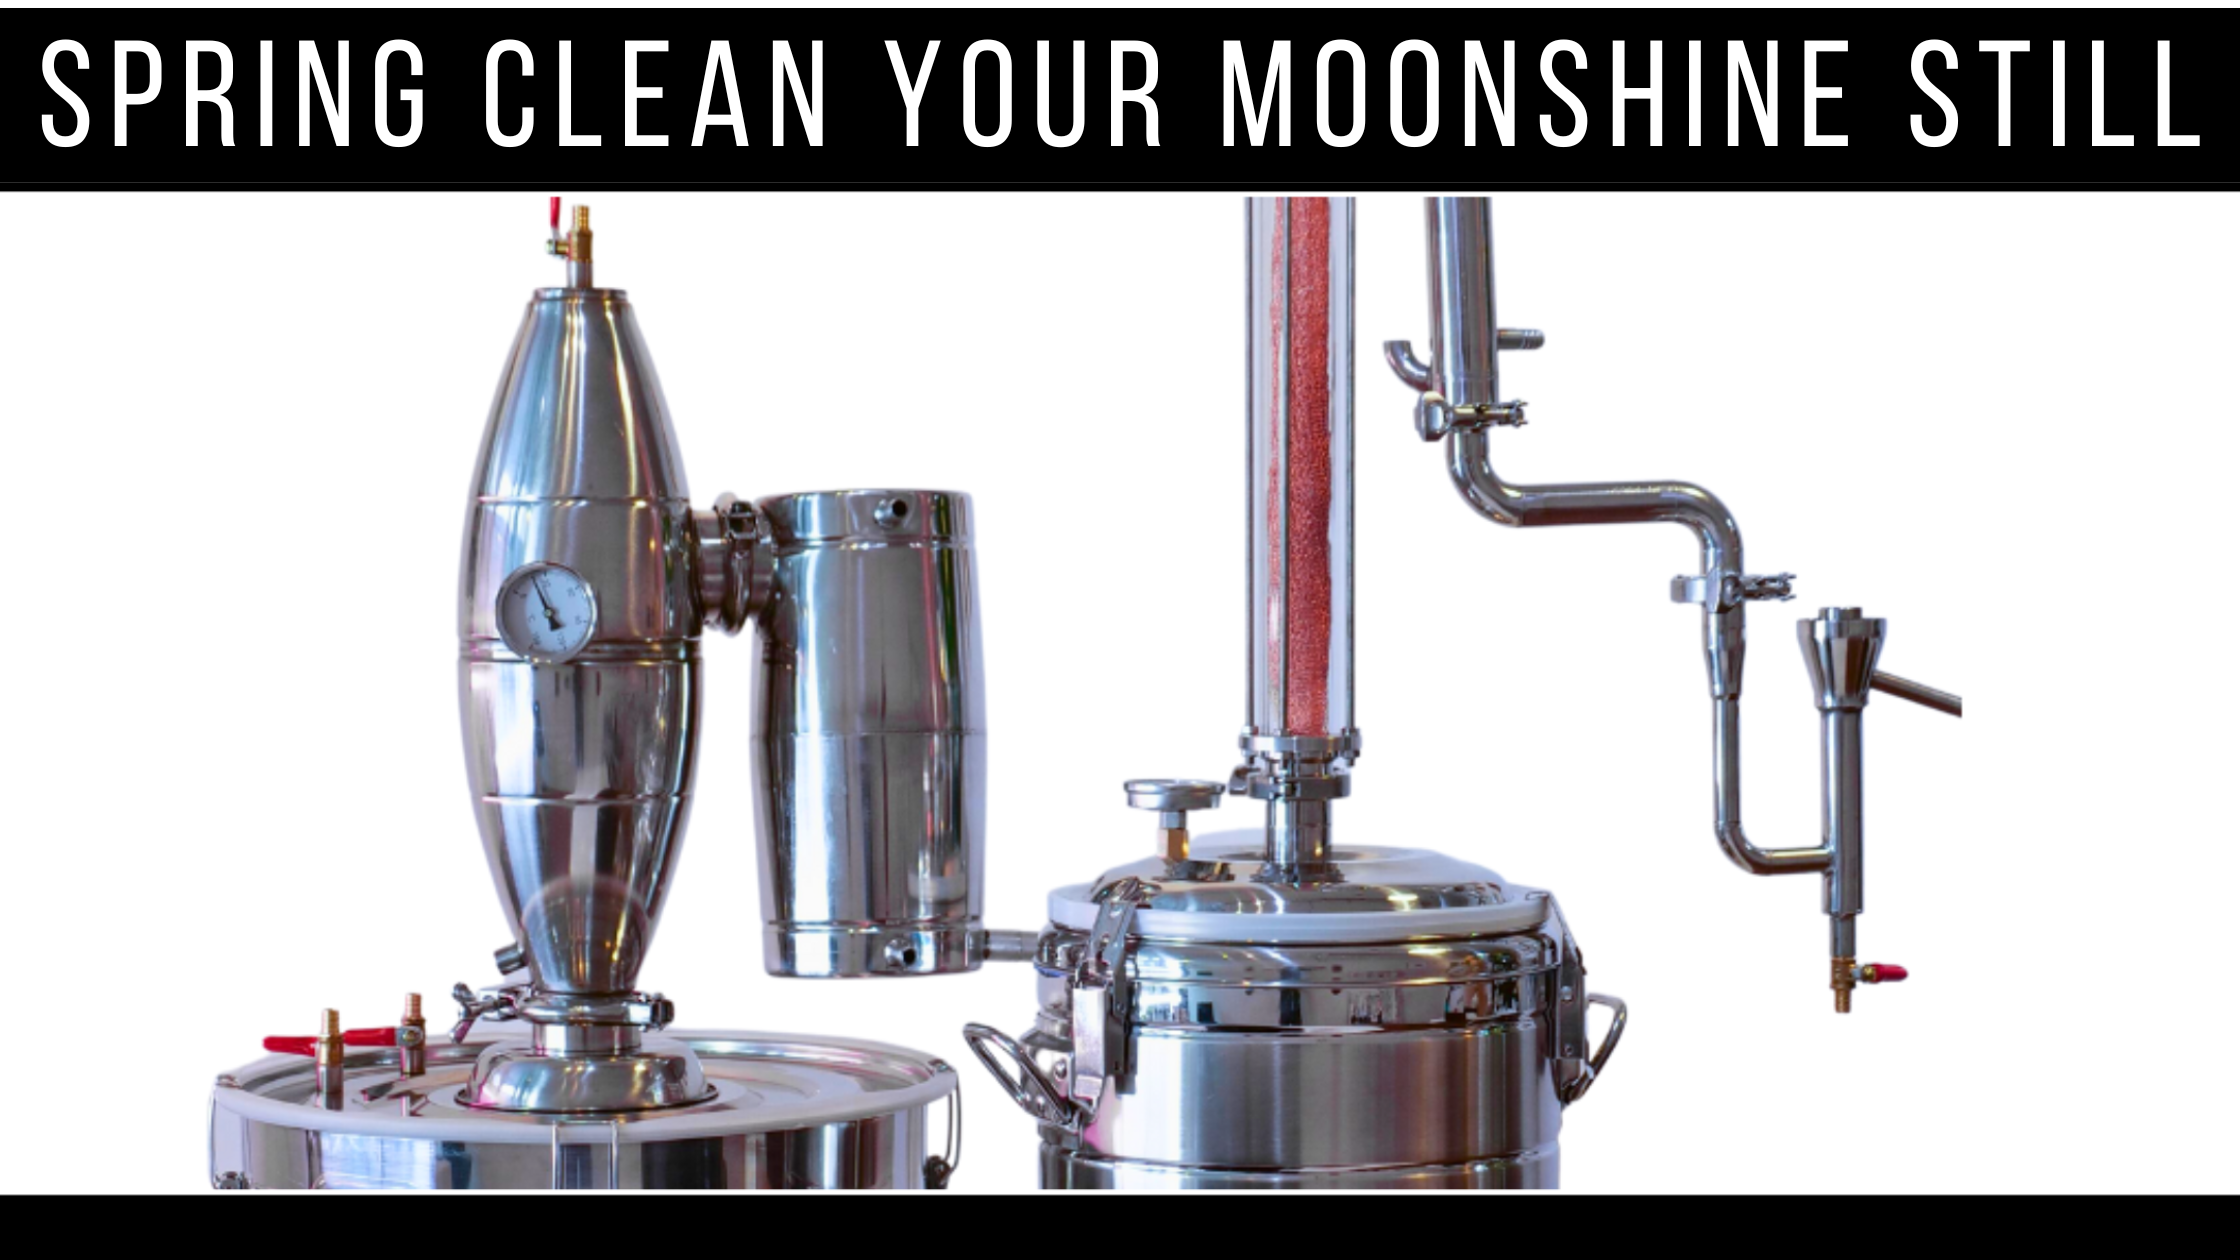 Spring Clean Your Moonshine Still